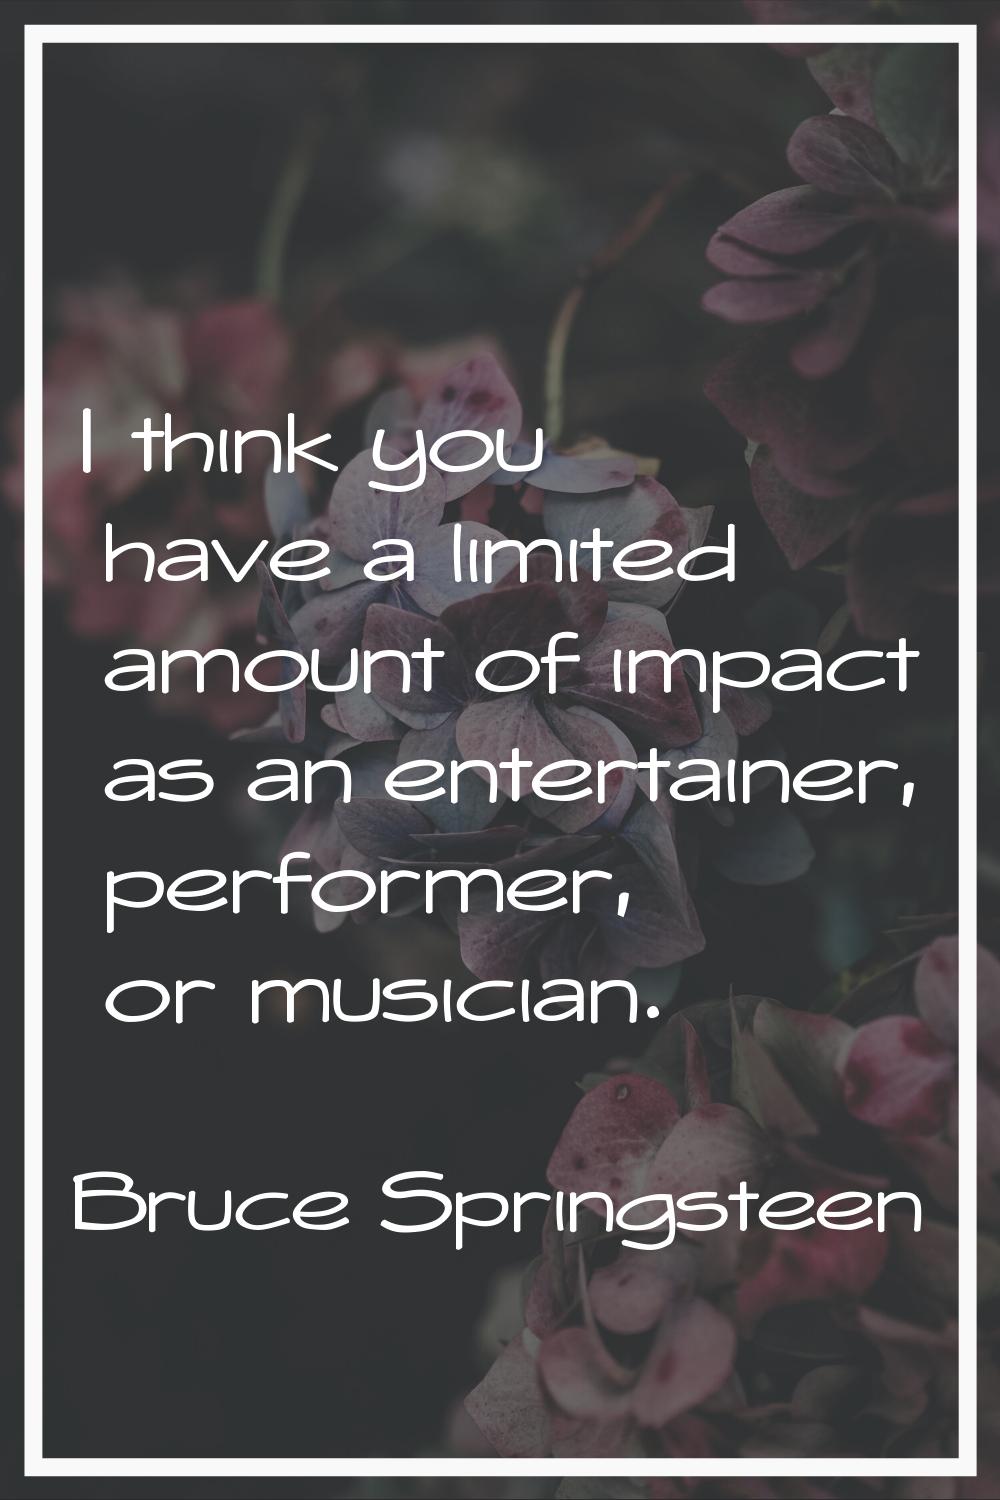 I think you have a limited amount of impact as an entertainer, performer, or musician.